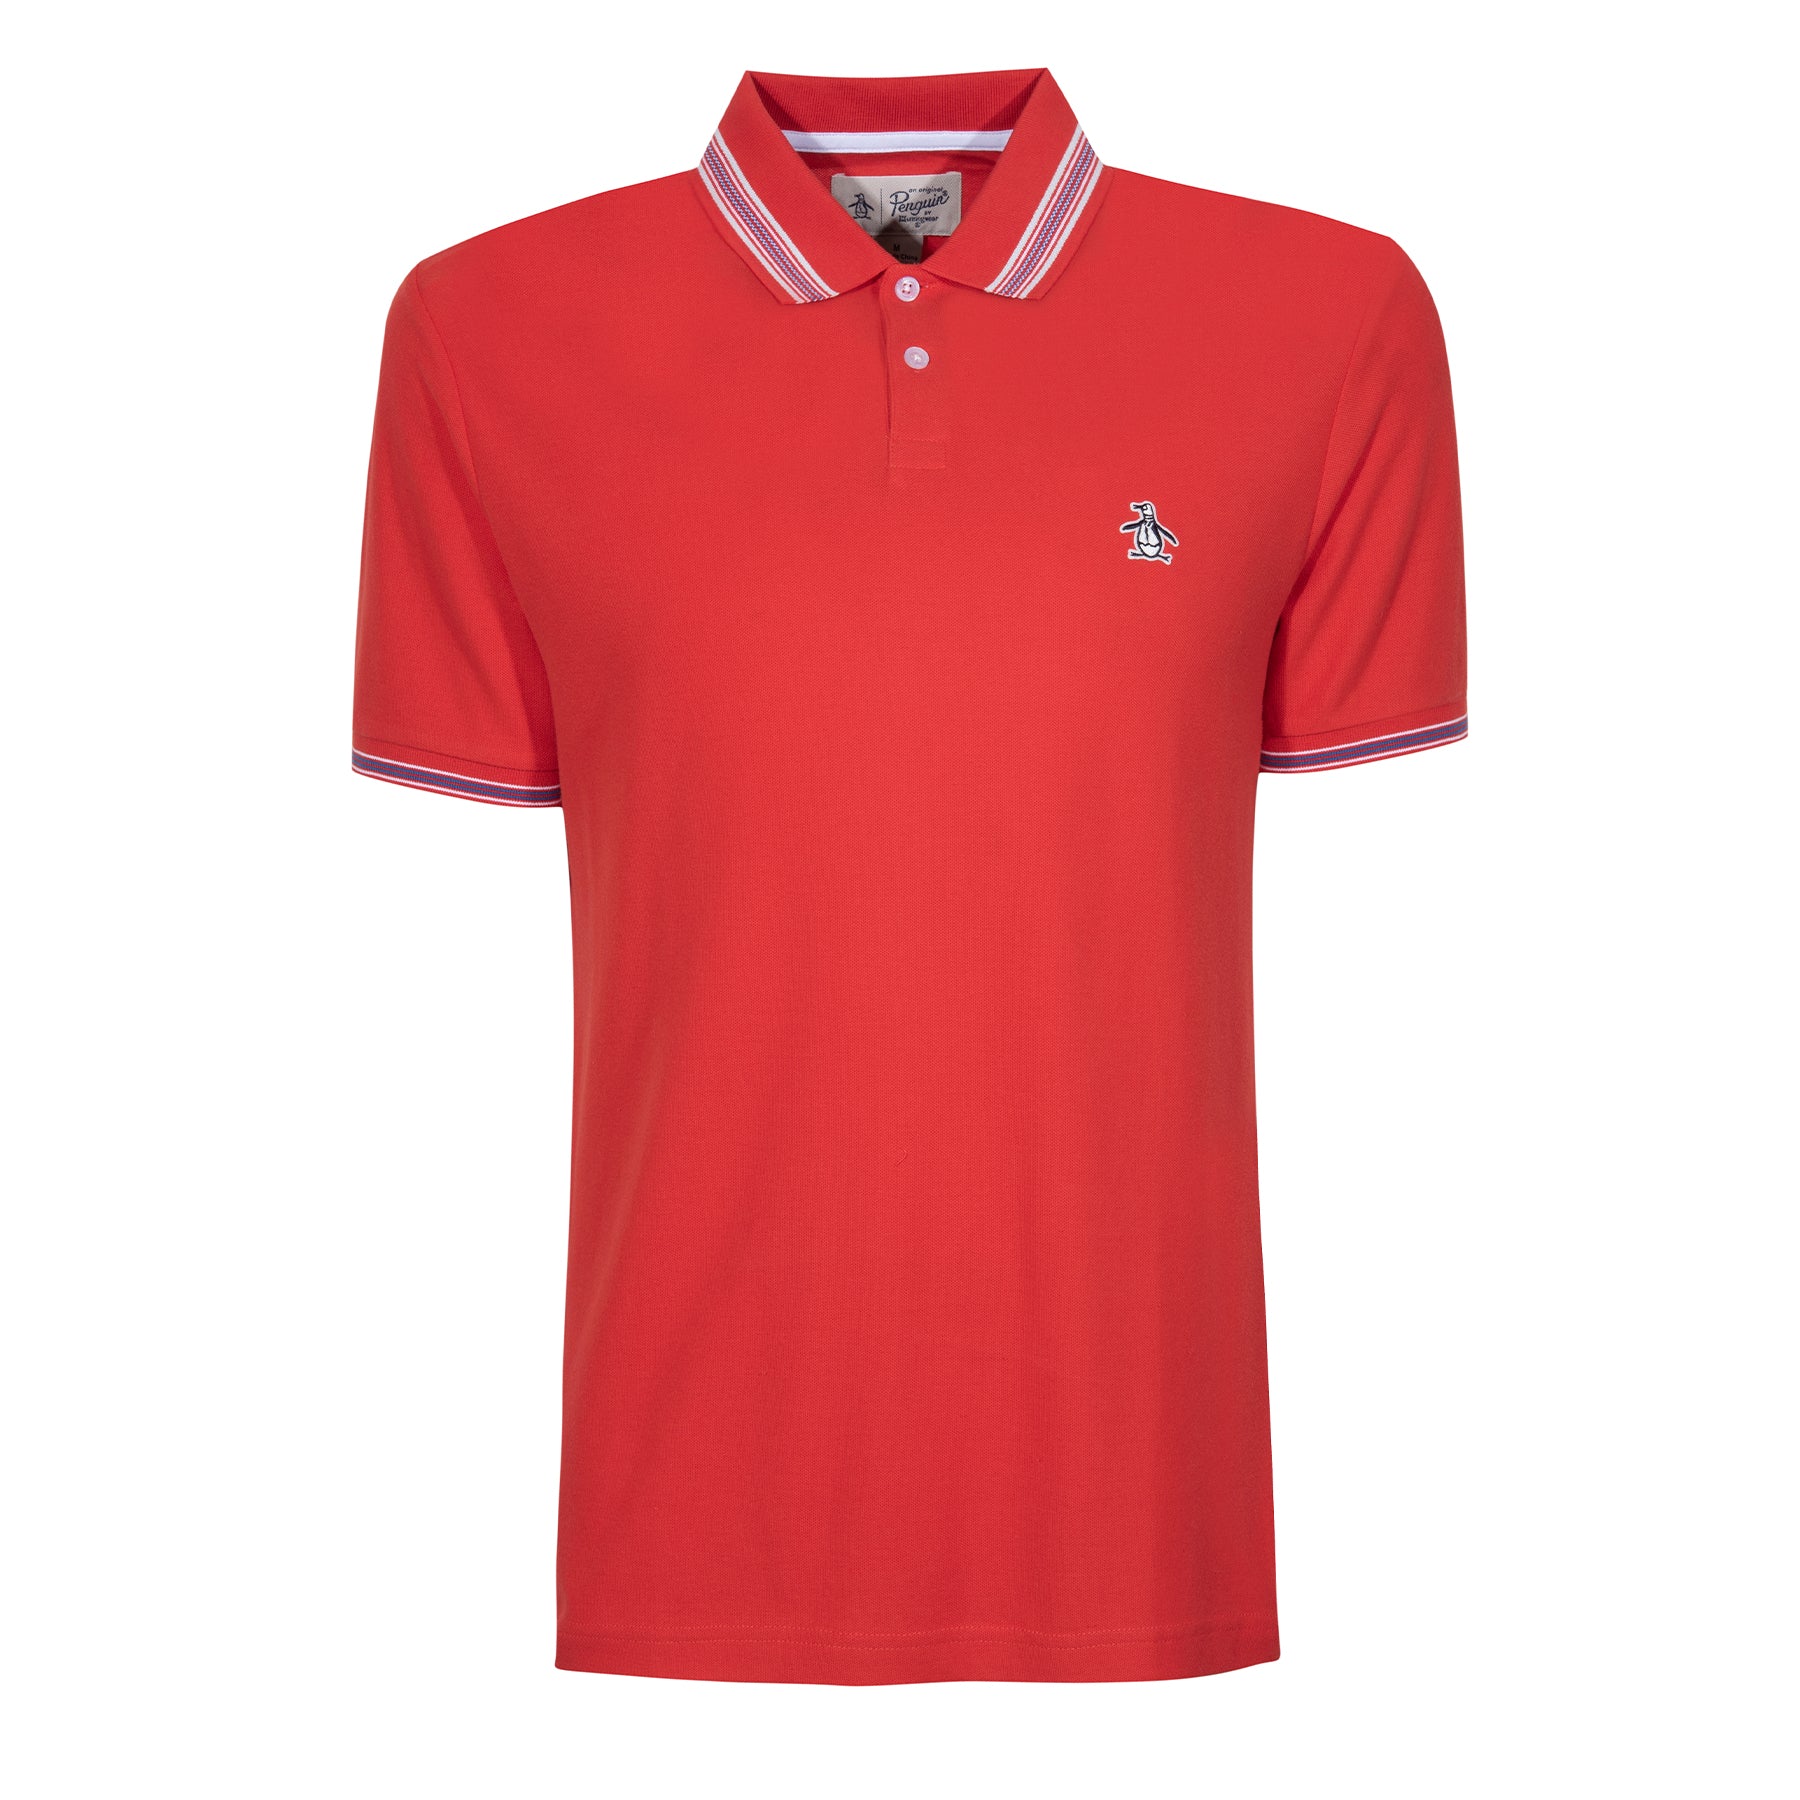 View Short Sleeve Cotton Tipped Collar Polo Shirt In Molten Lava Outlet information